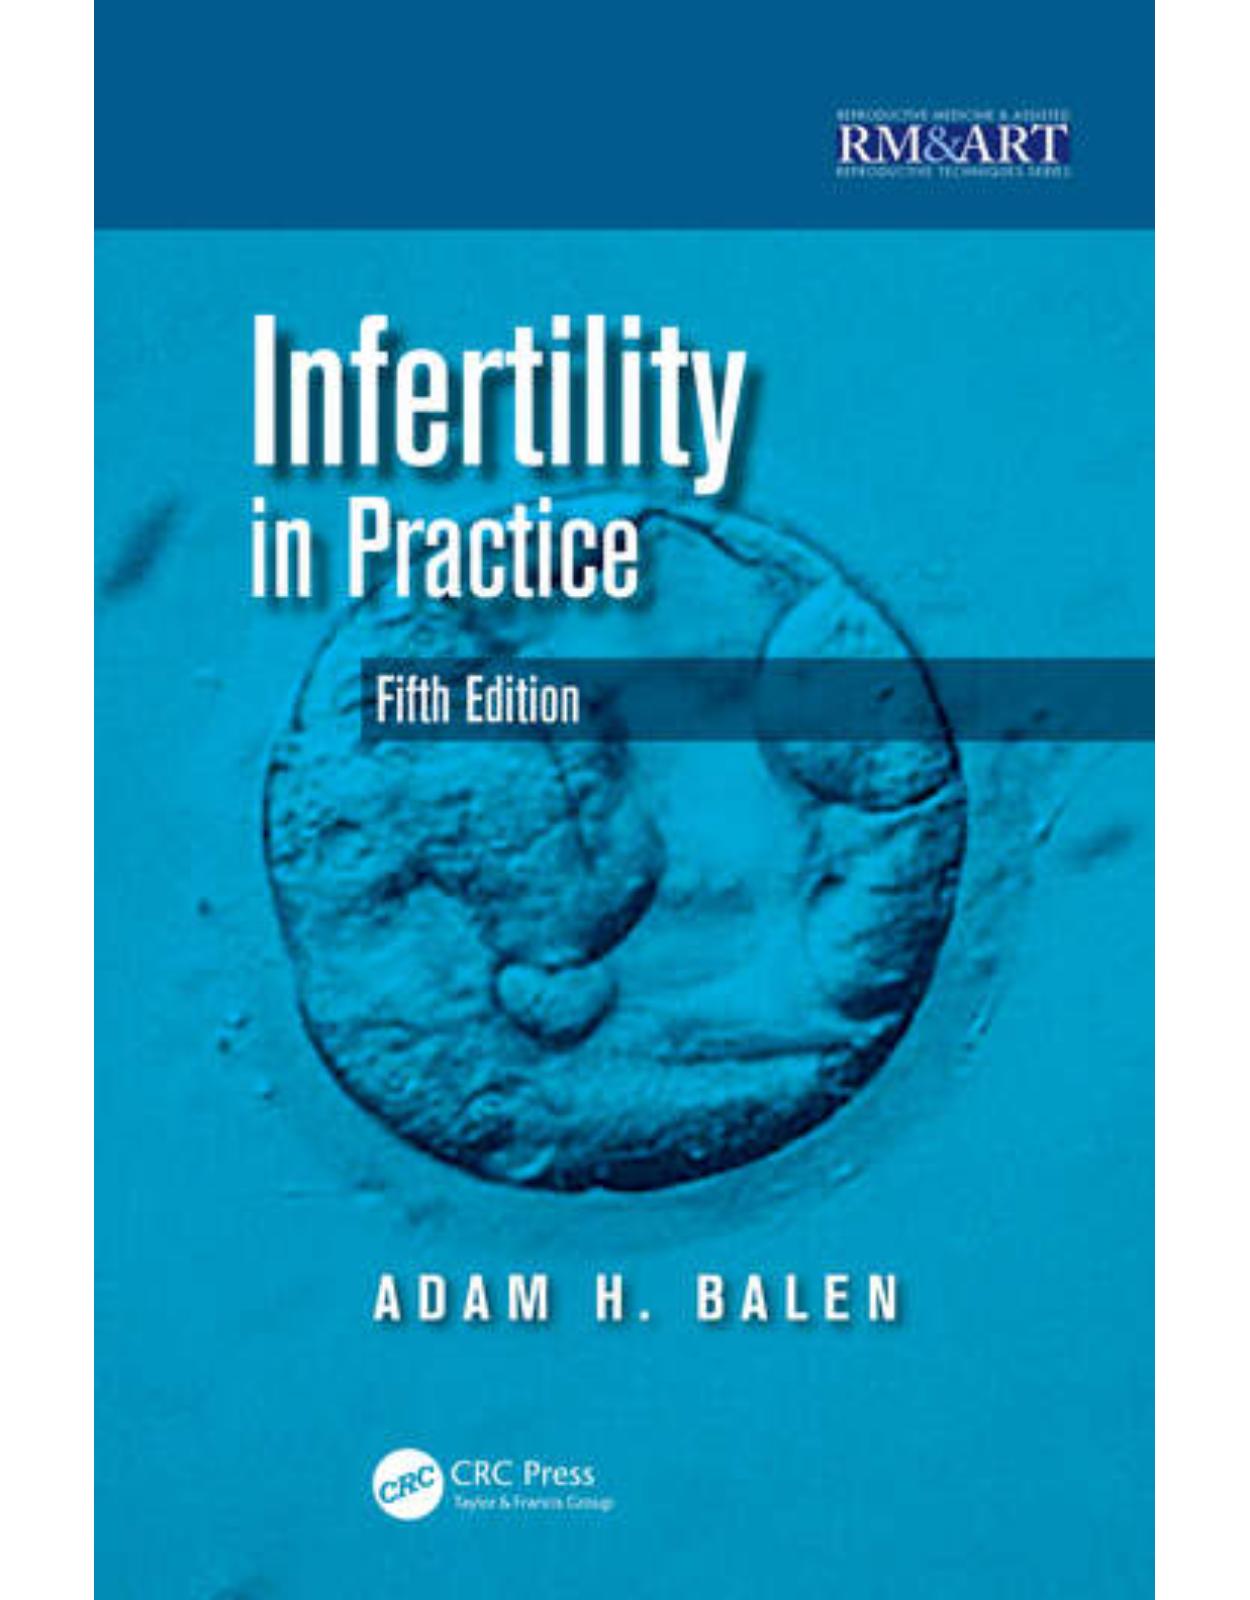 Infertility in Practice, Fourth Edition (Reproductive Medicine & Assisted Reproductive Techniques) 